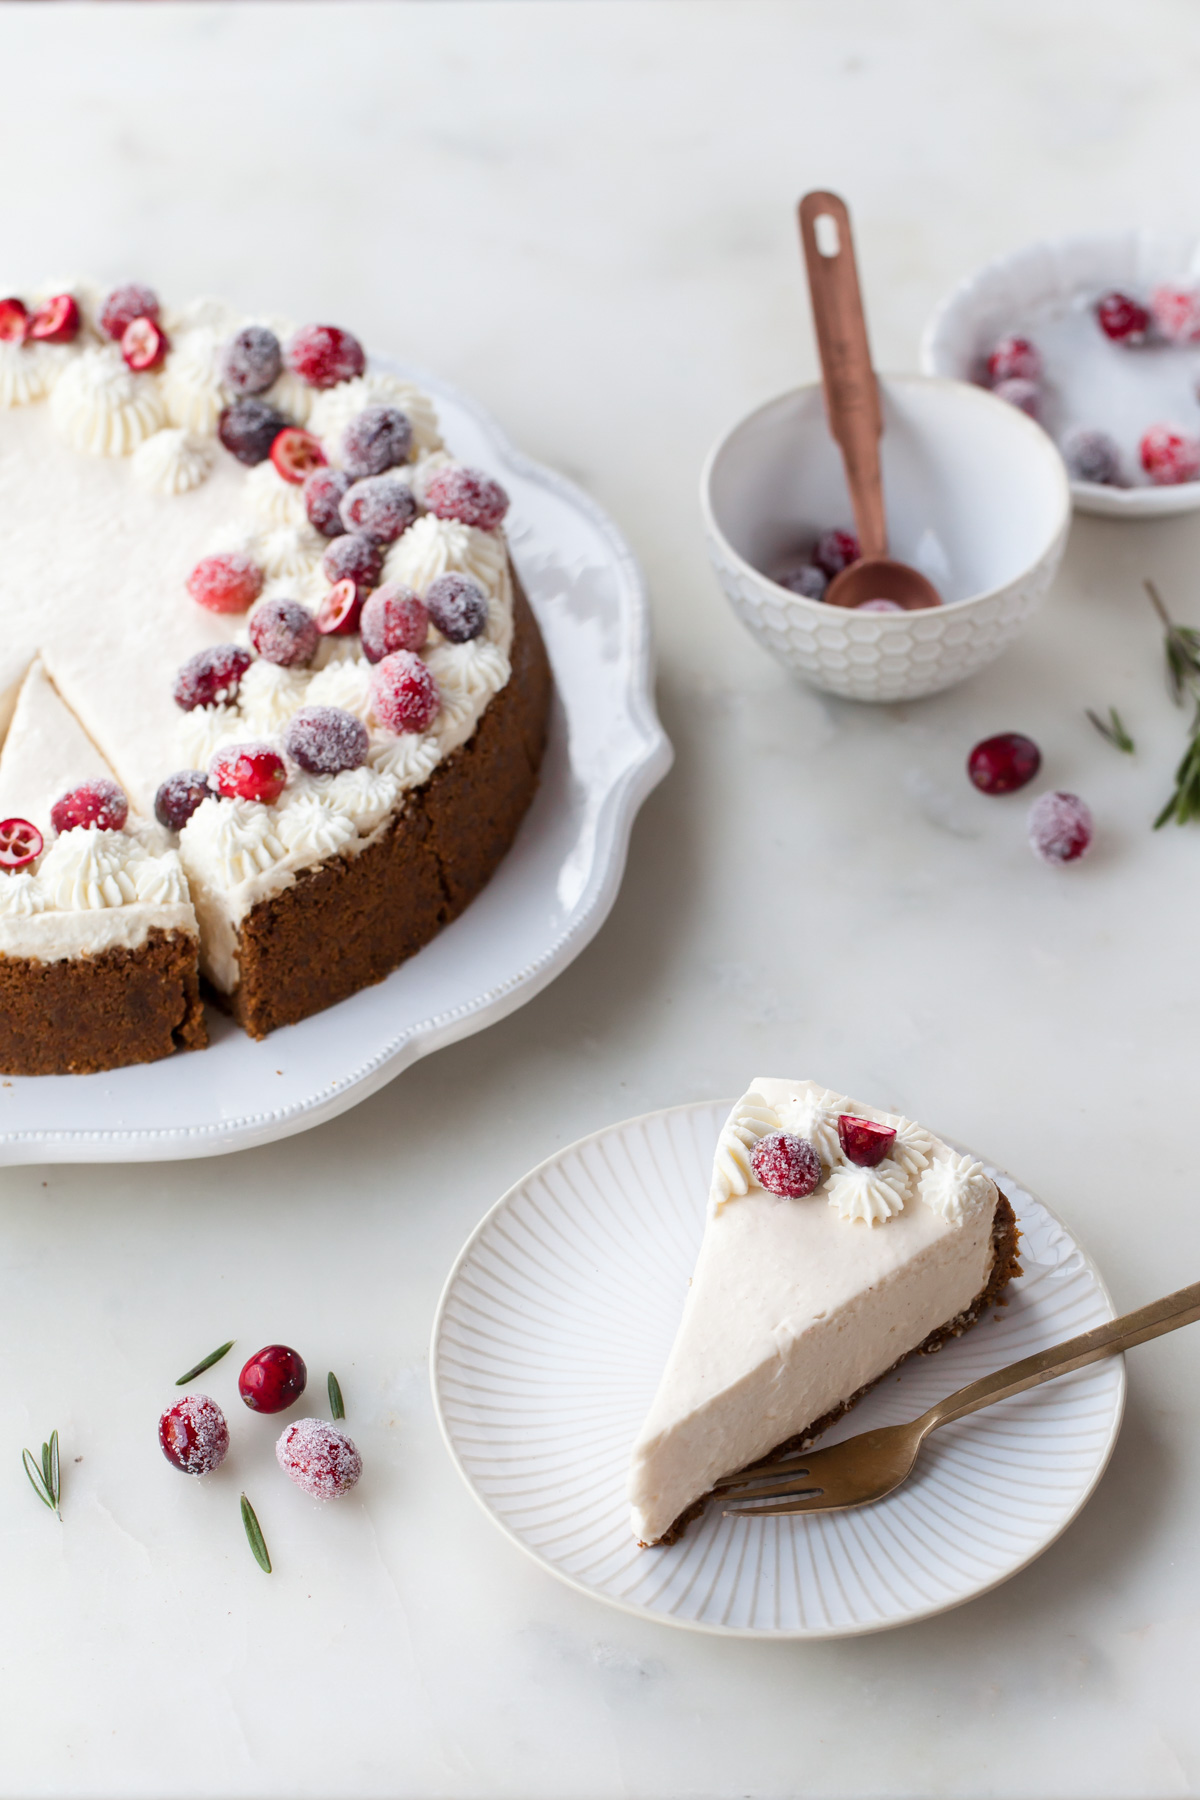 Eggnog cheesecake dressed up with sparkling cranberries